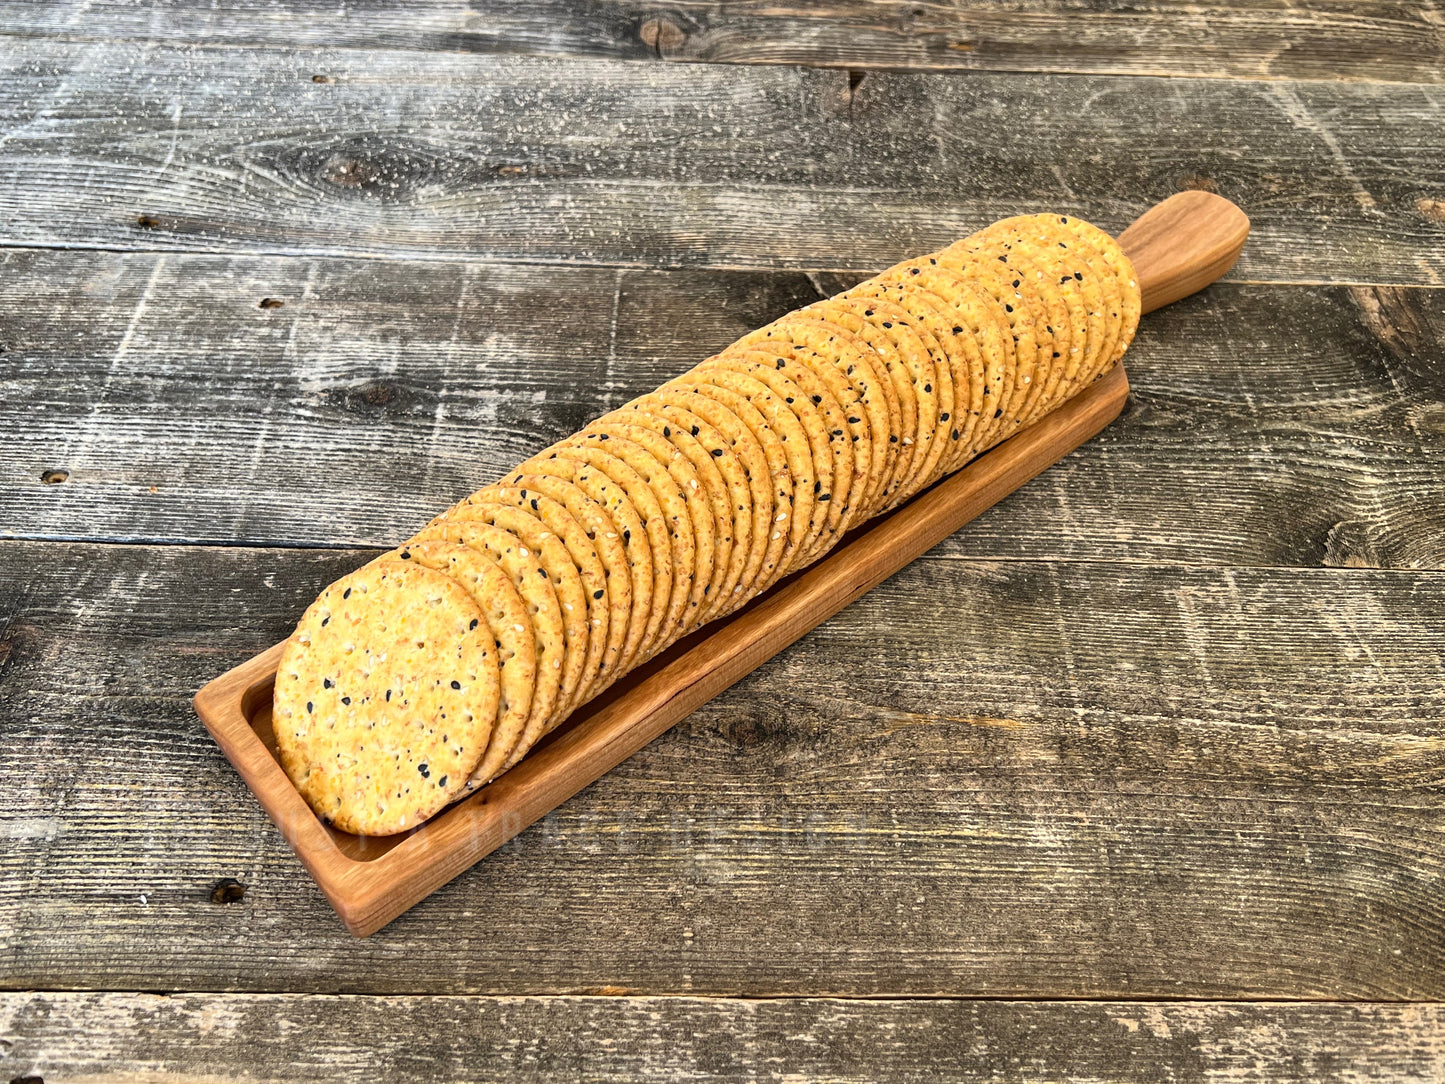 Cheese  & Cracker Tray, Crackers Tray, Cheese Tray, Appetizer Tray, Wood Platter, Serving Tray, Grazing Tray, Cookie Tray, Handmade Gift